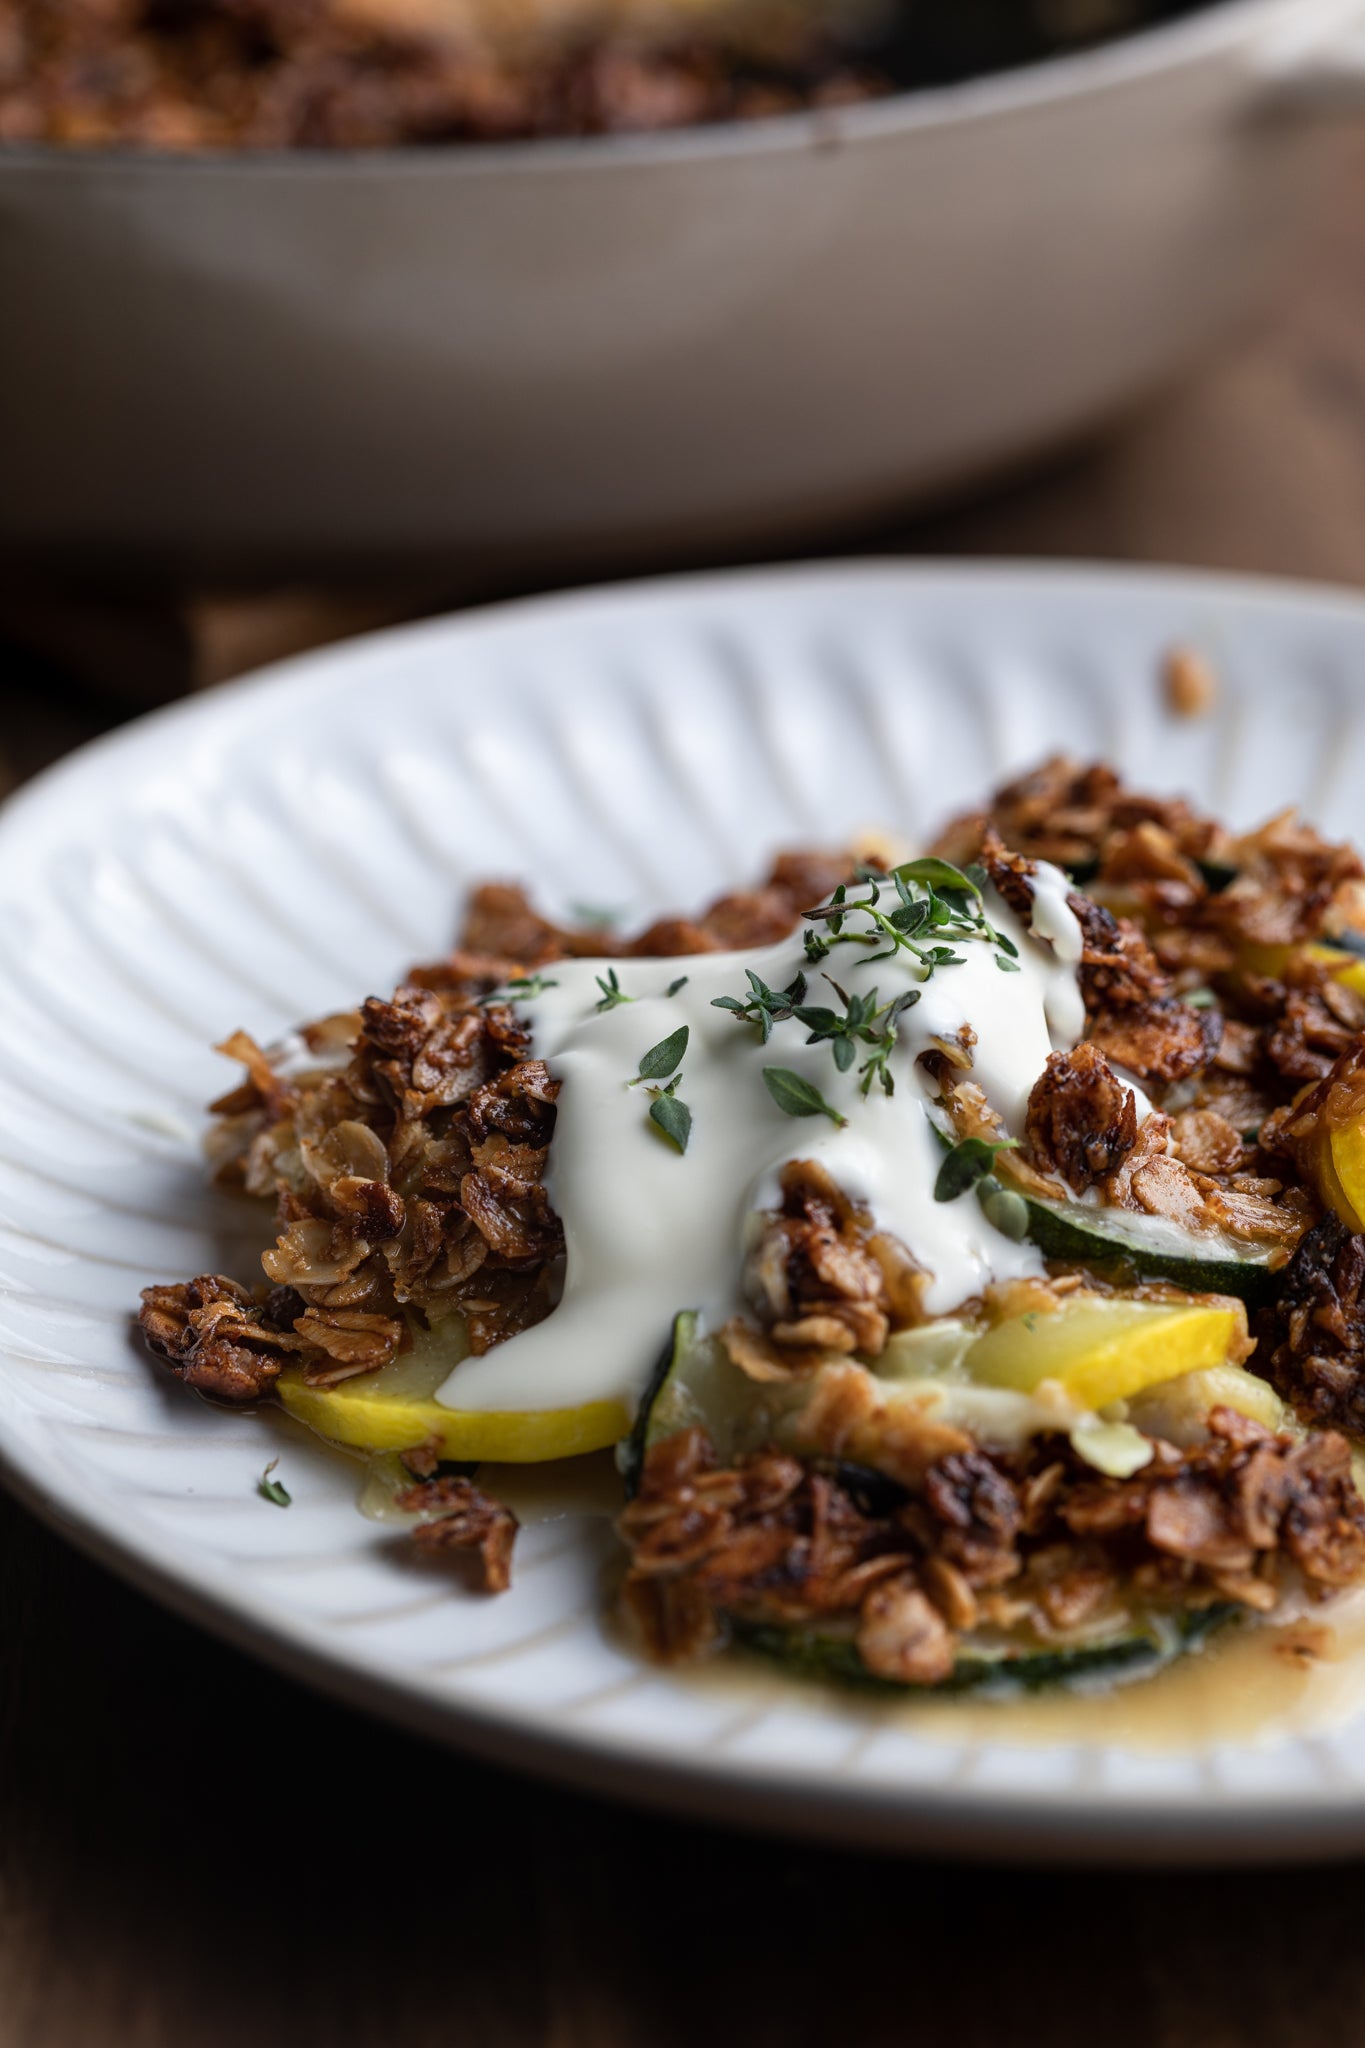 Summer Squash Gratin with Truffle Granola by Jenny Hurley from Sunny with Shadows